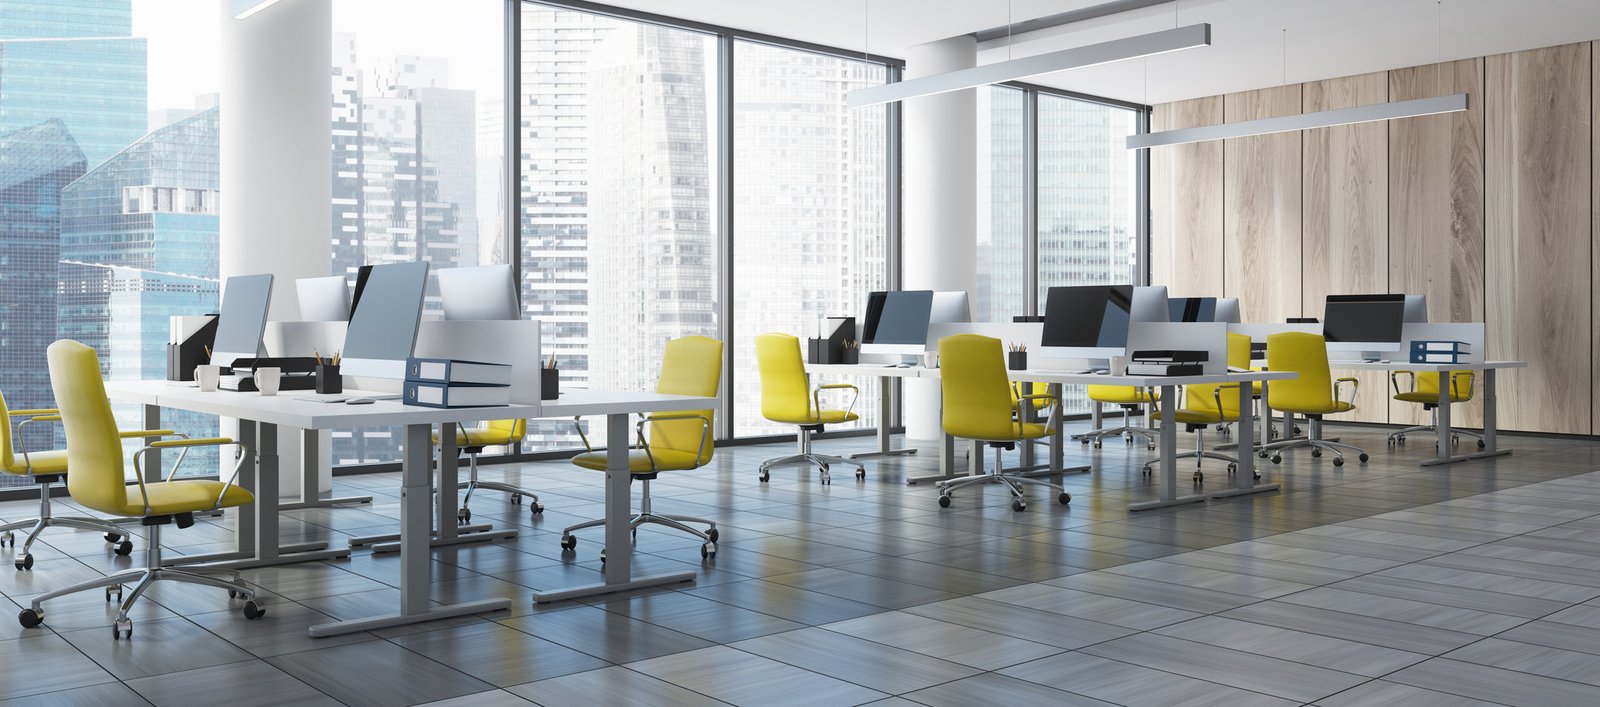 Is Cleaning The Reason Behind Less Productivity? Go For Office Cleaning